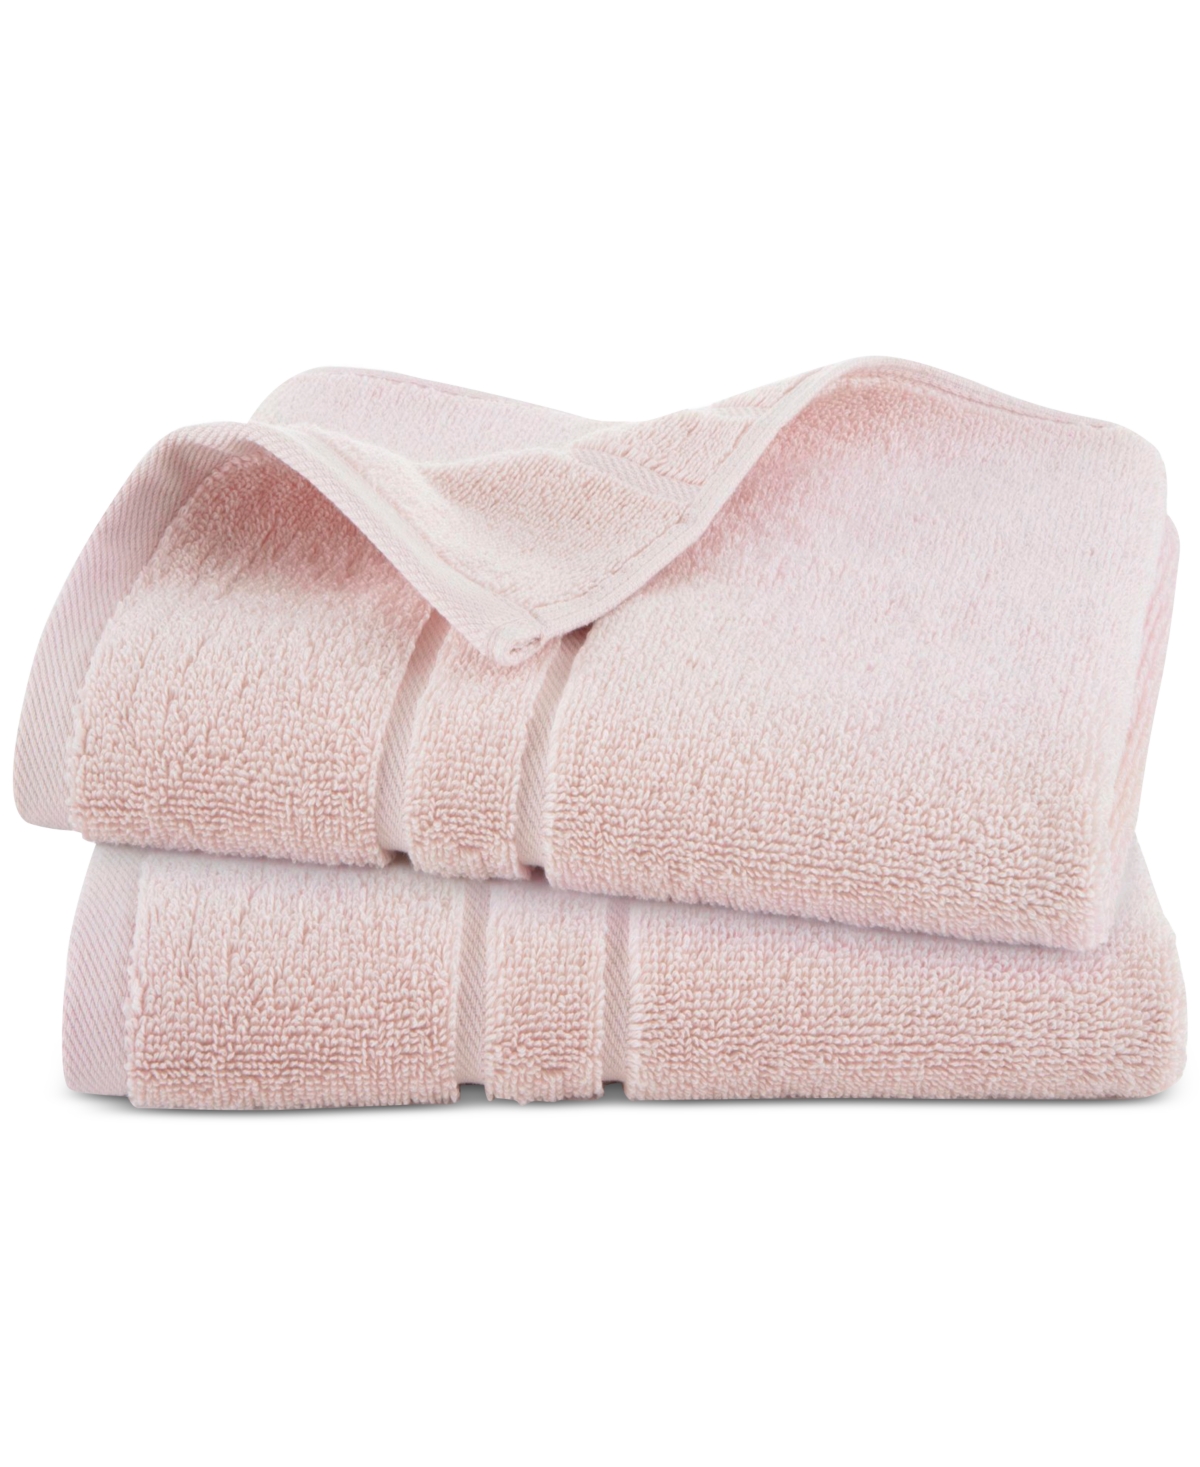 Clean Design Home X Martex Low Lint 2 Pack Supima Cotton Hand Towels In Blush